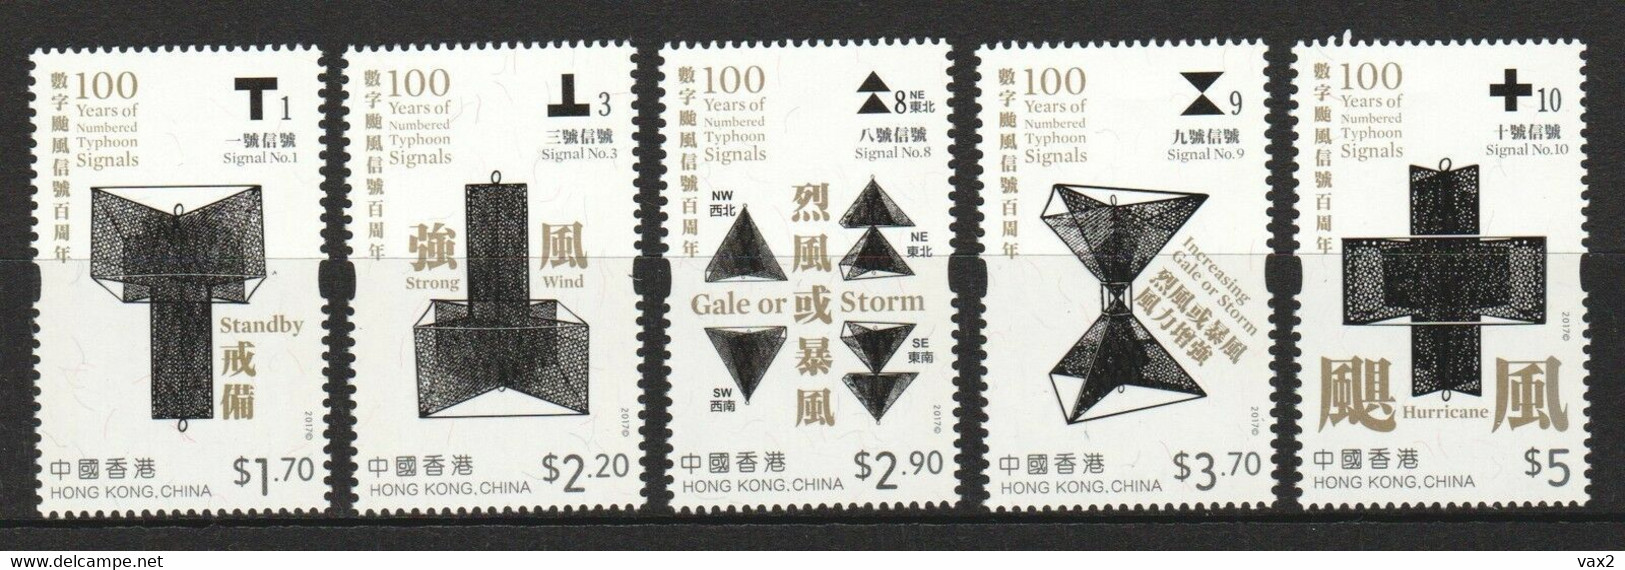 Hong Kong 2017 S#1848-1852 100 Years Of Numbered Typhoon Signals MNH Unusual (Braille Ink) - Neufs